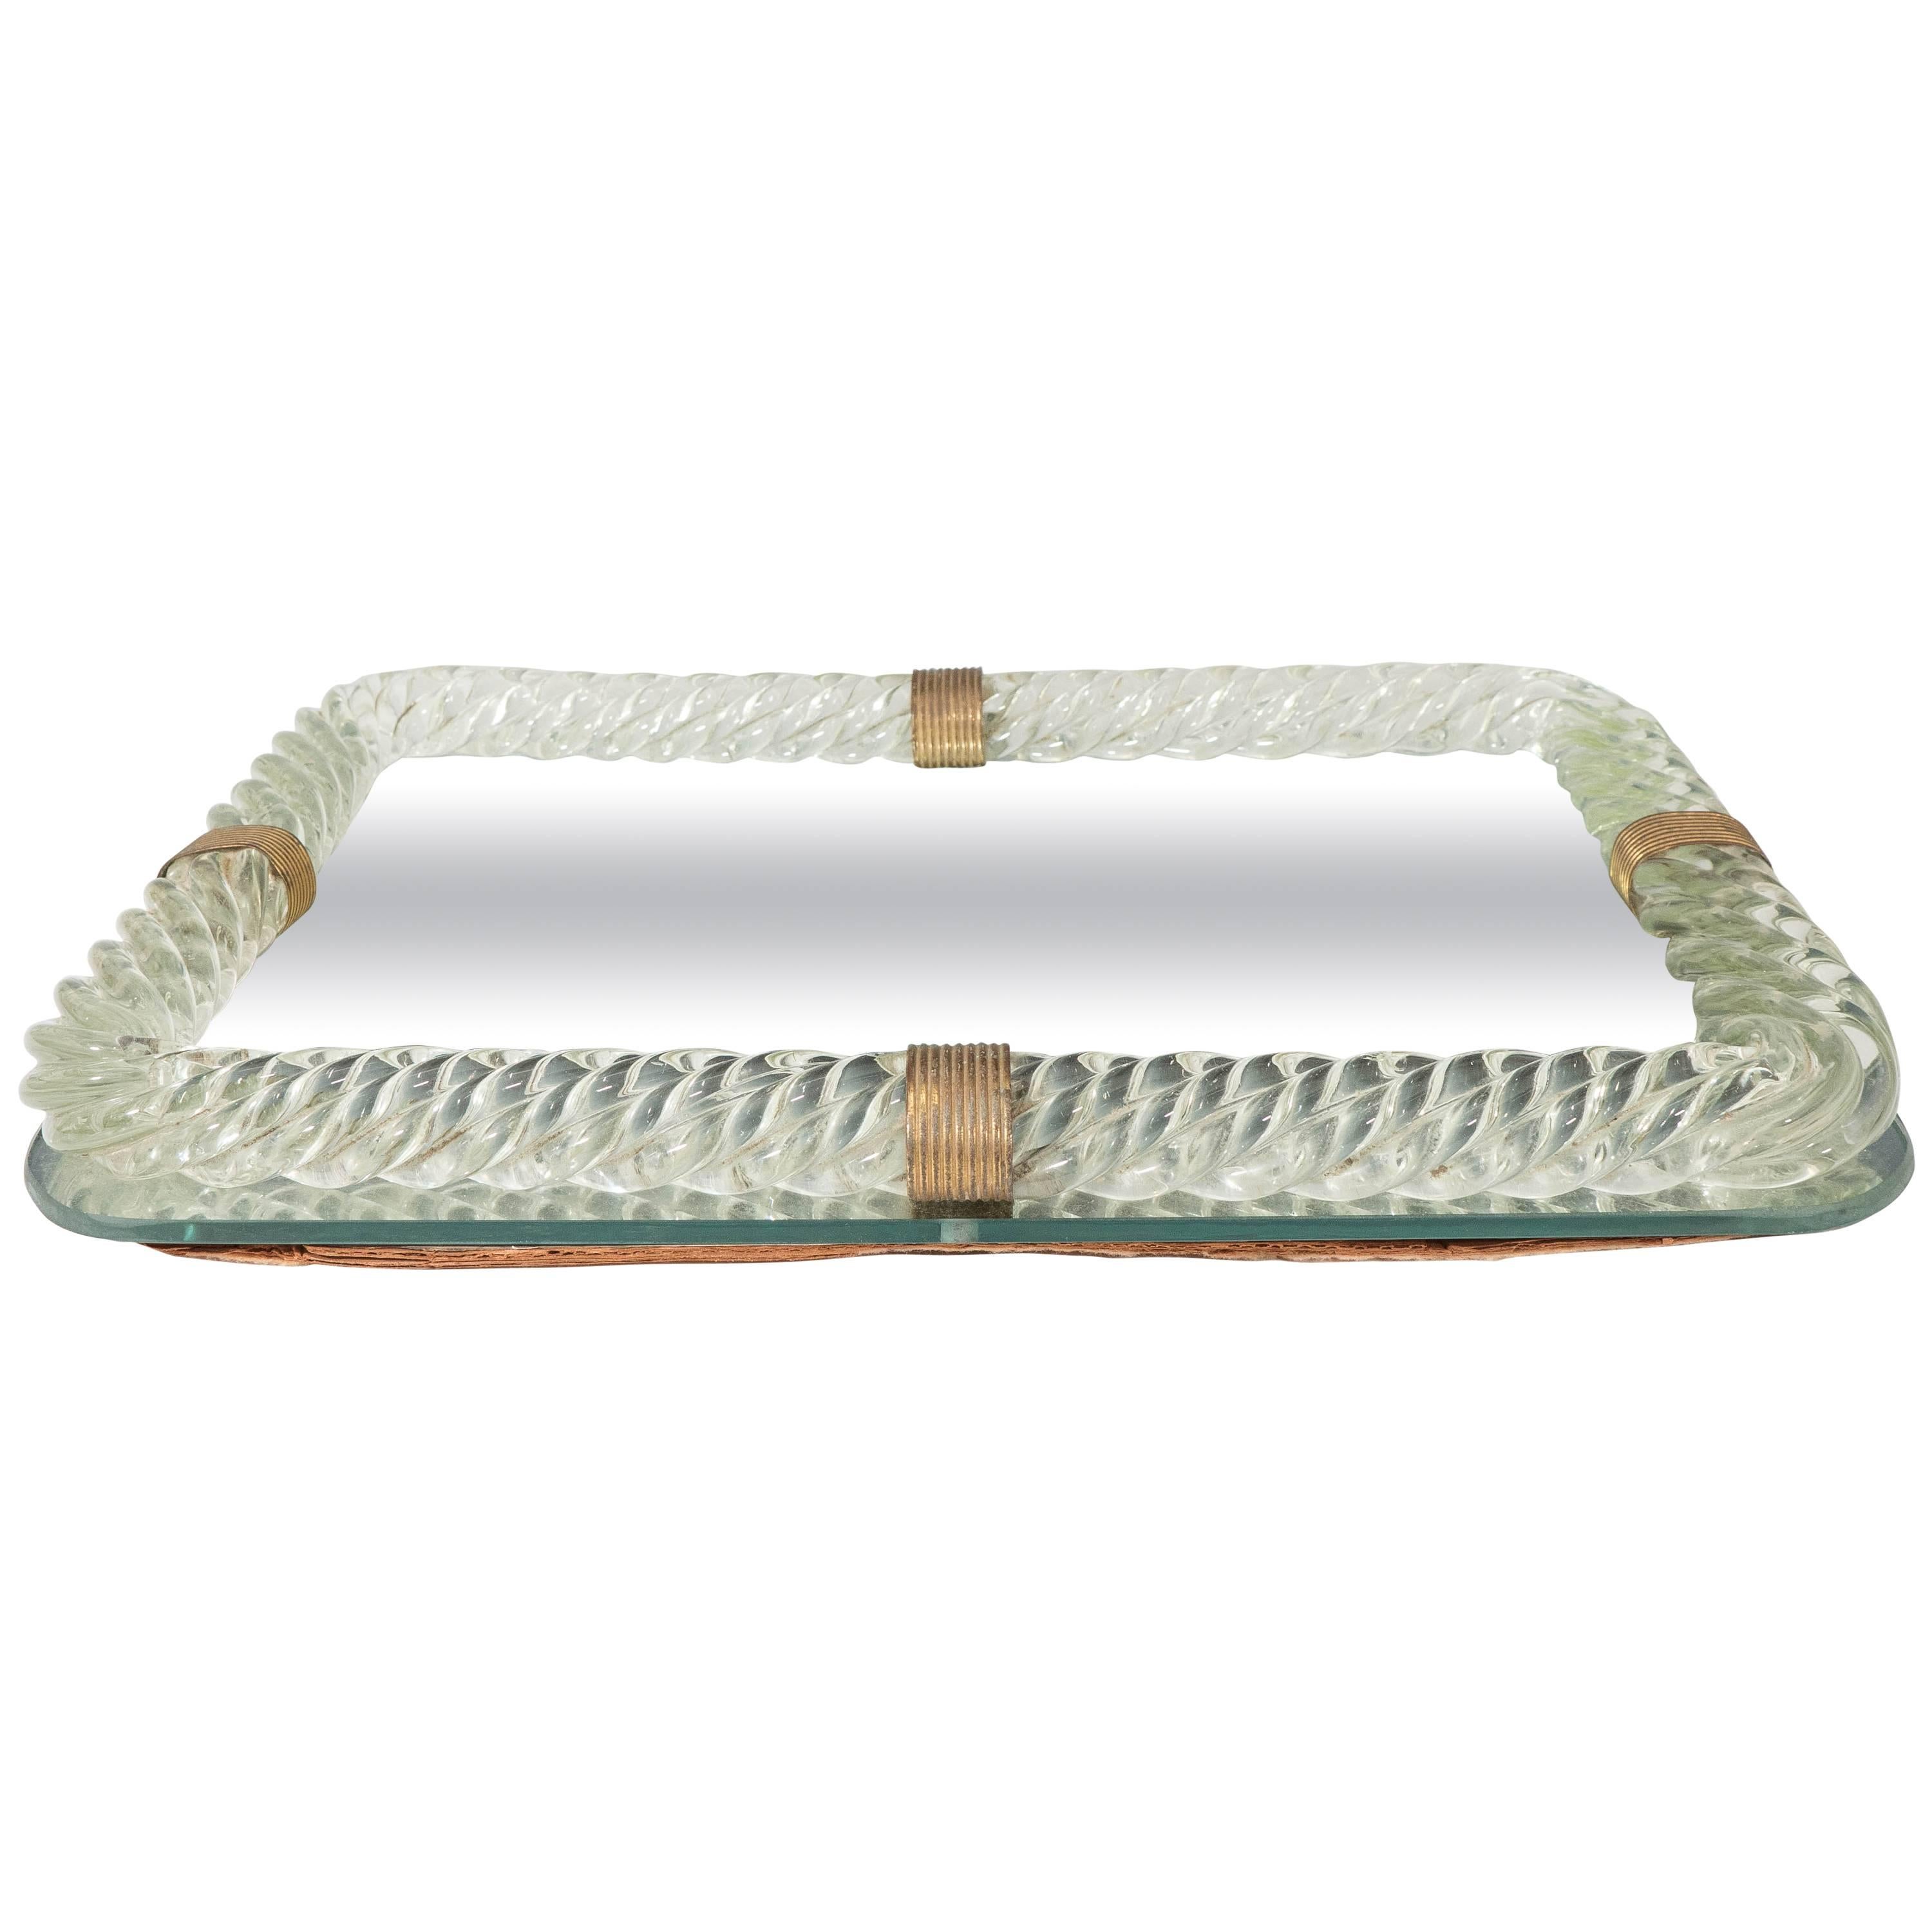 Venini Glass Mirrored Vanity Tray with Twisted Frame